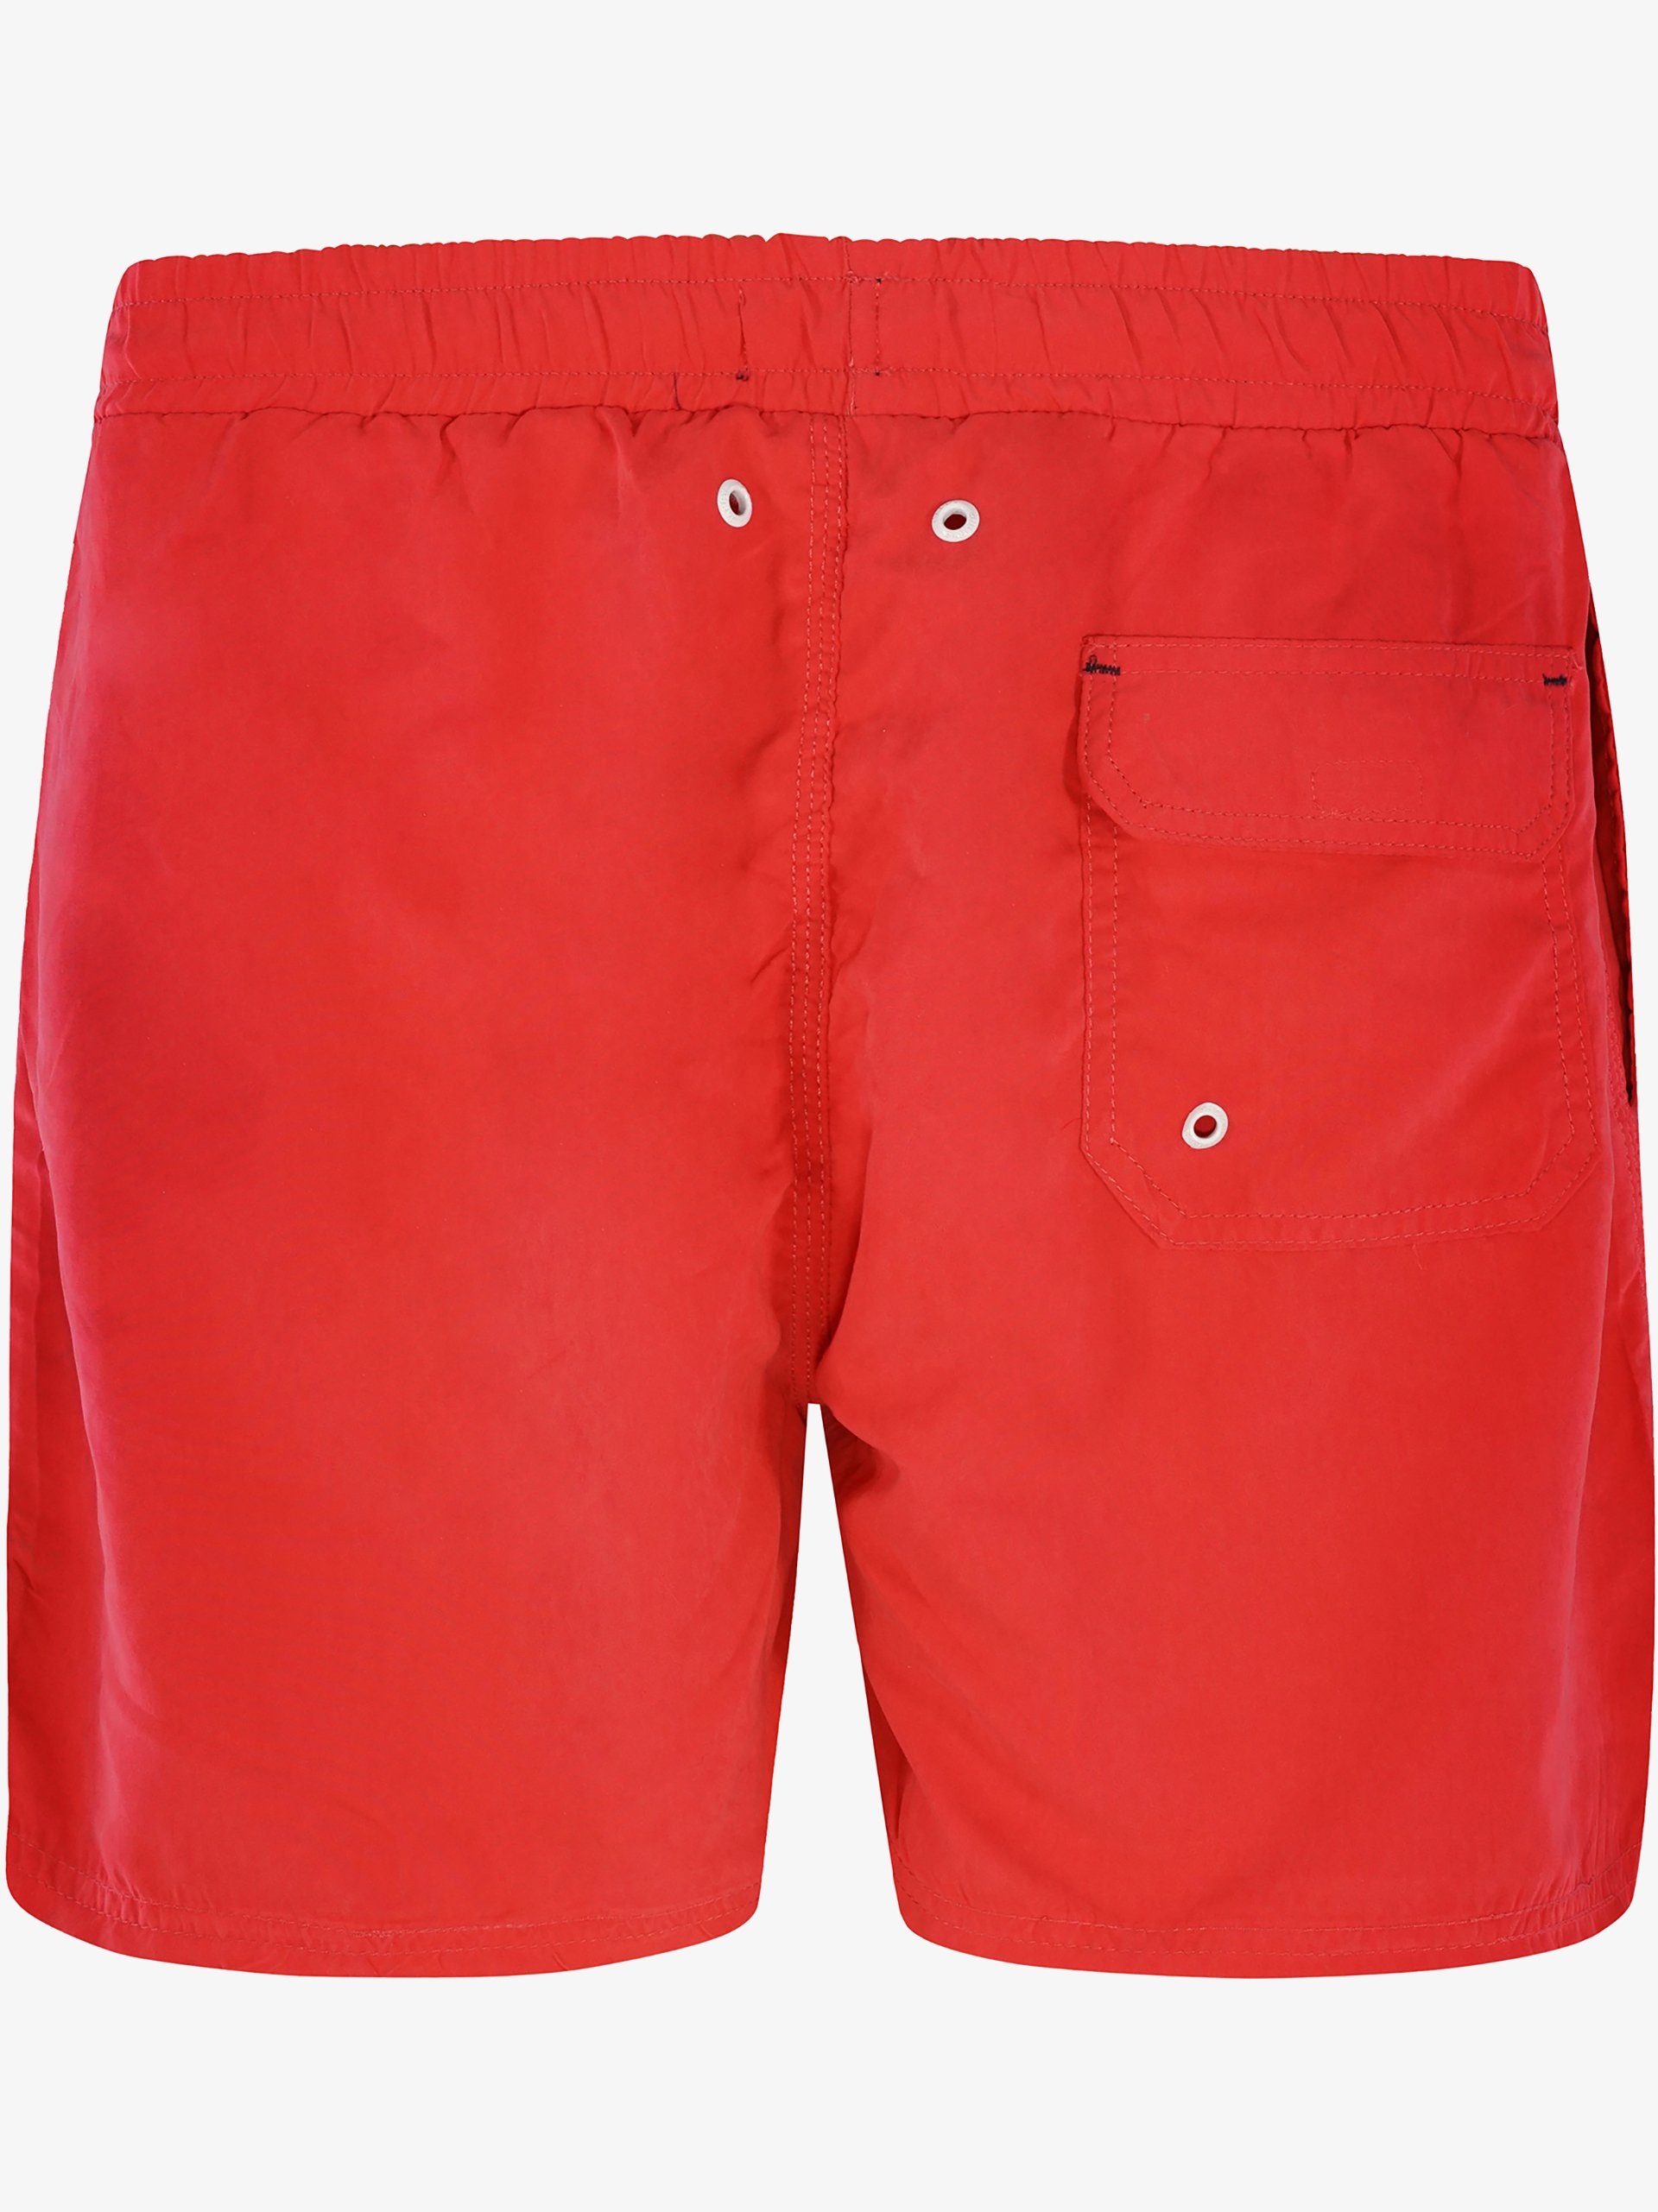 Simple SHORTS HAPPY Badehose Red